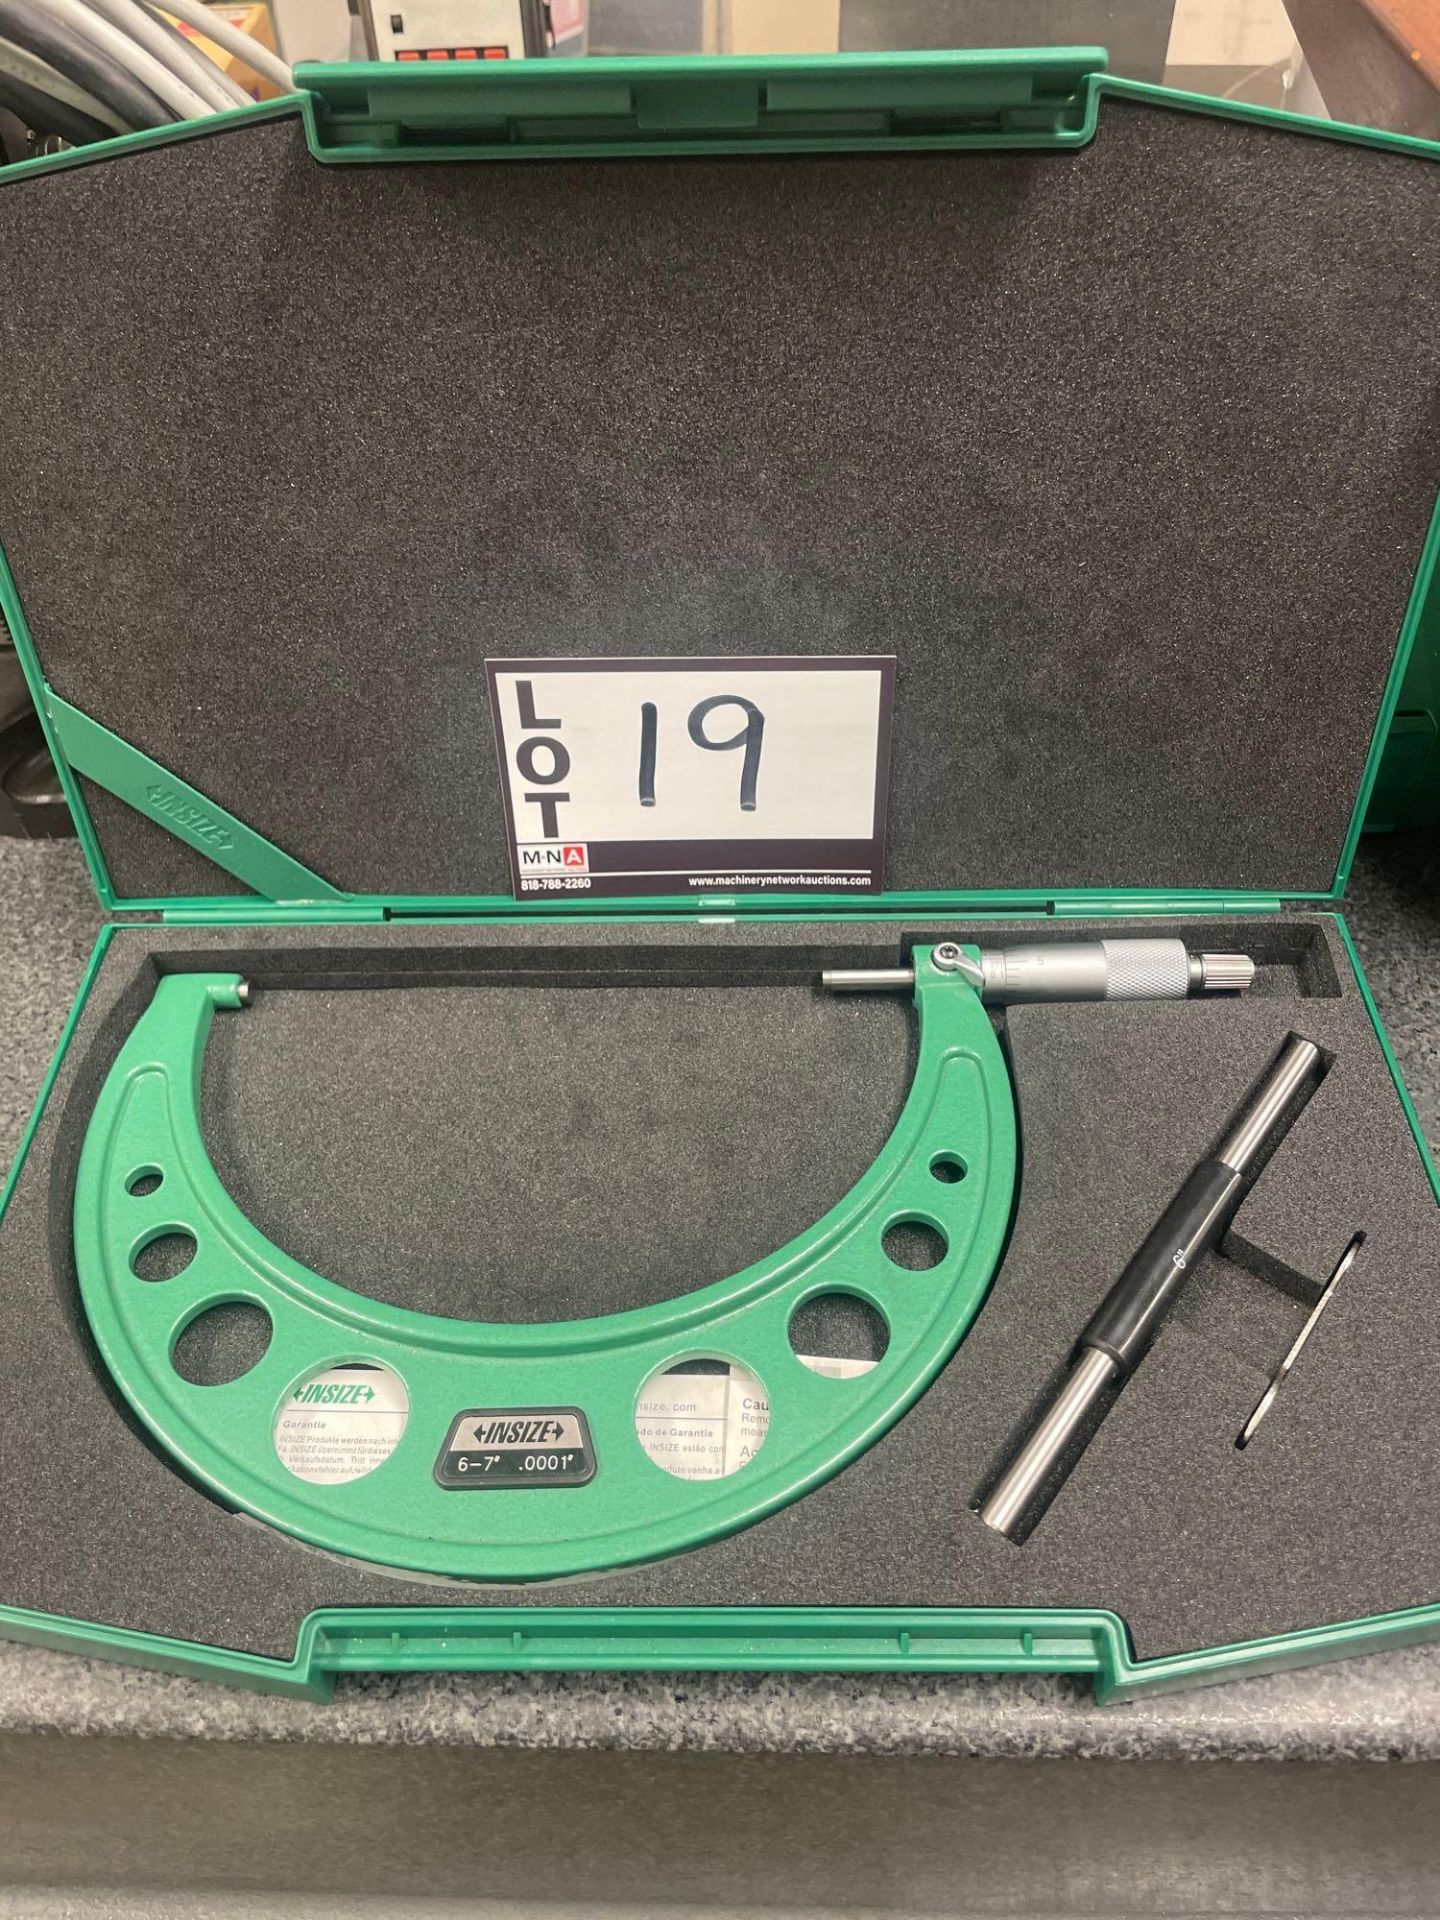 Insize 6" - 7" Outside Micrometer